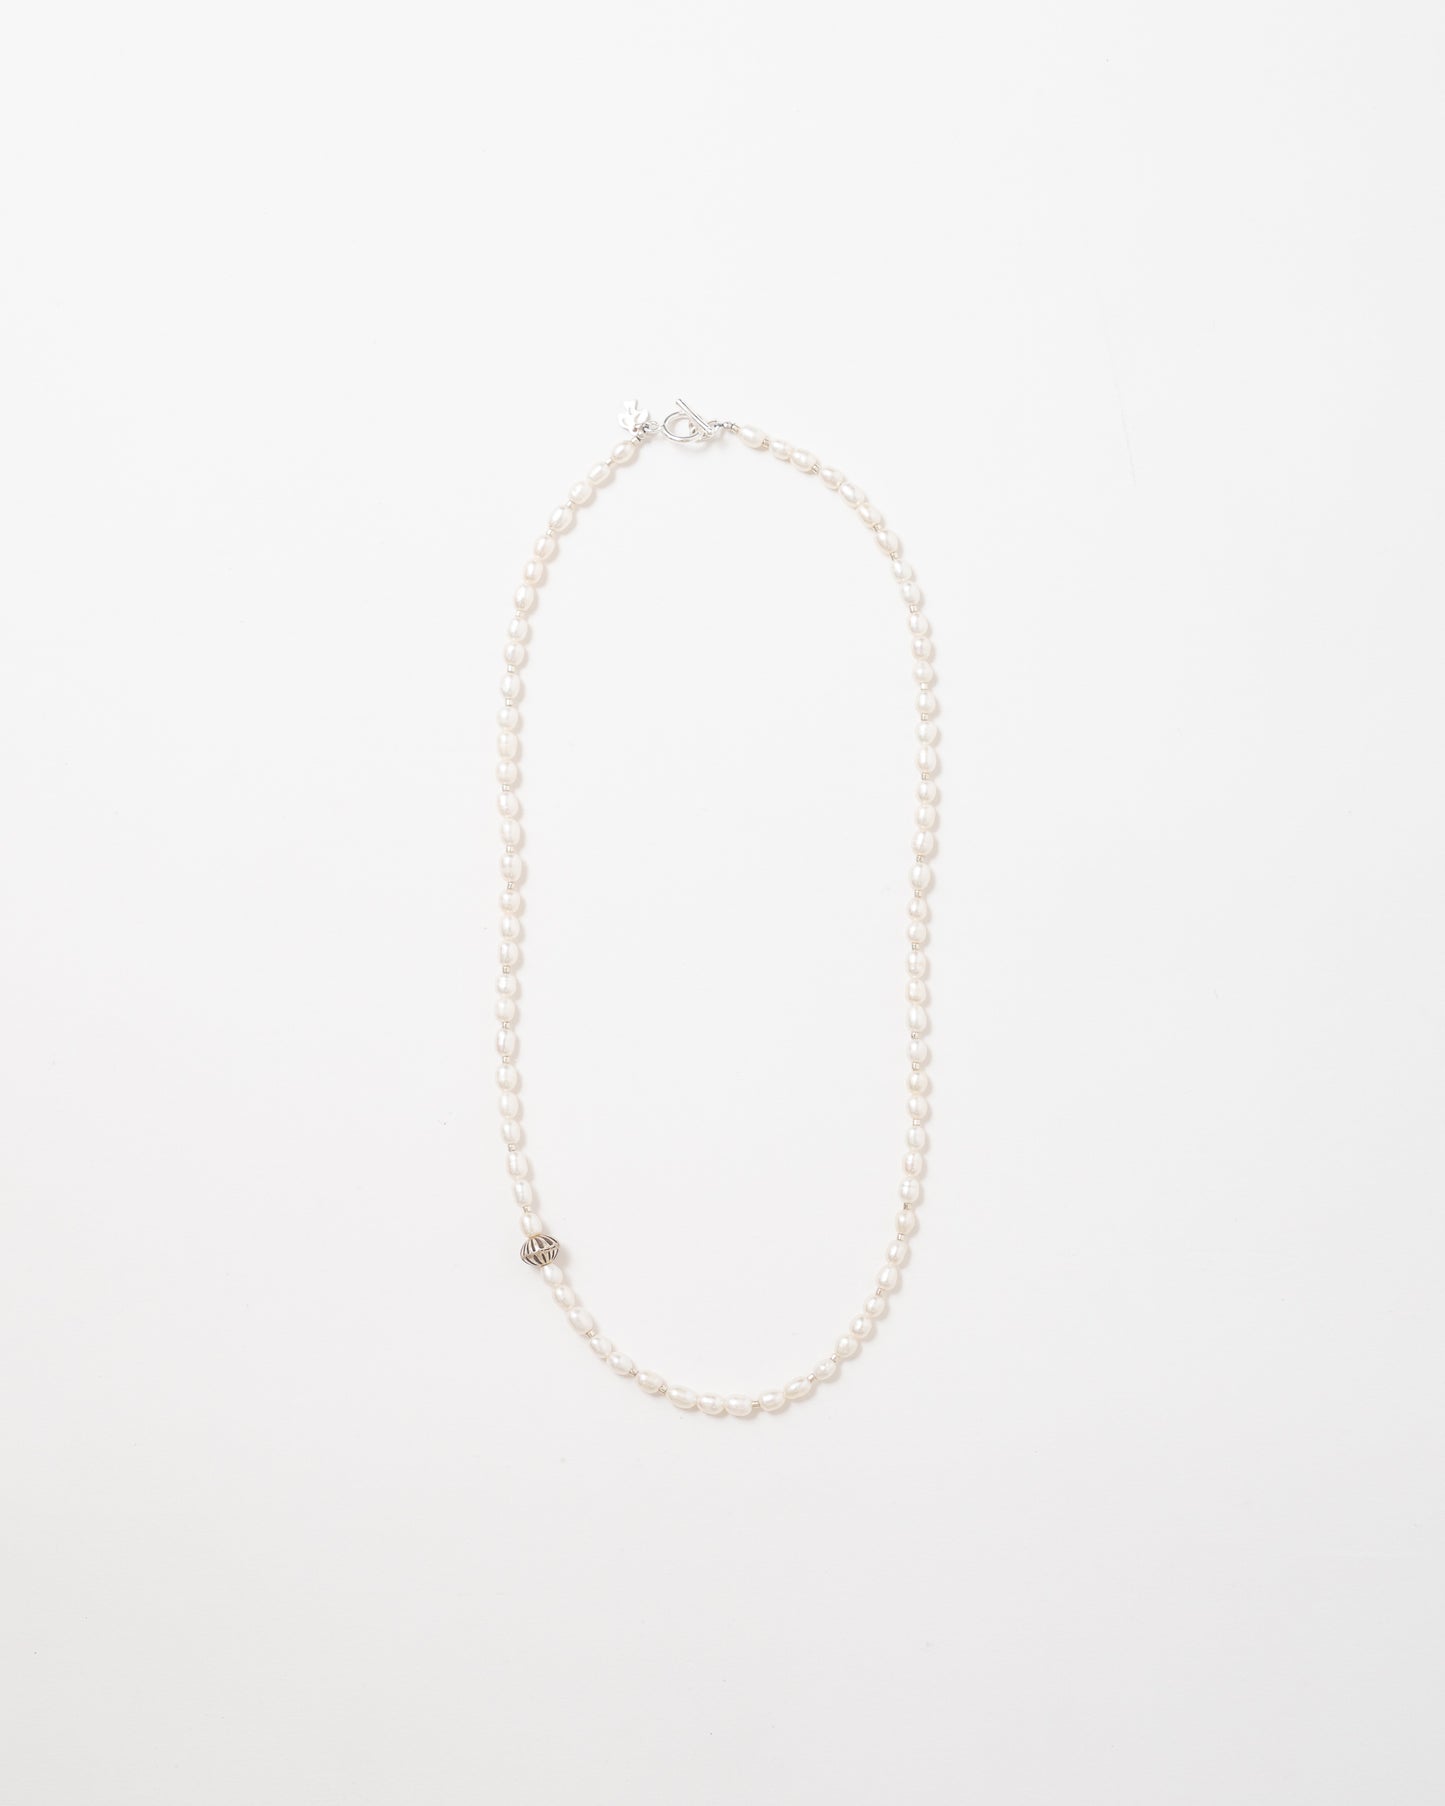 Freshwater Pearl + Silver Necklace 20"